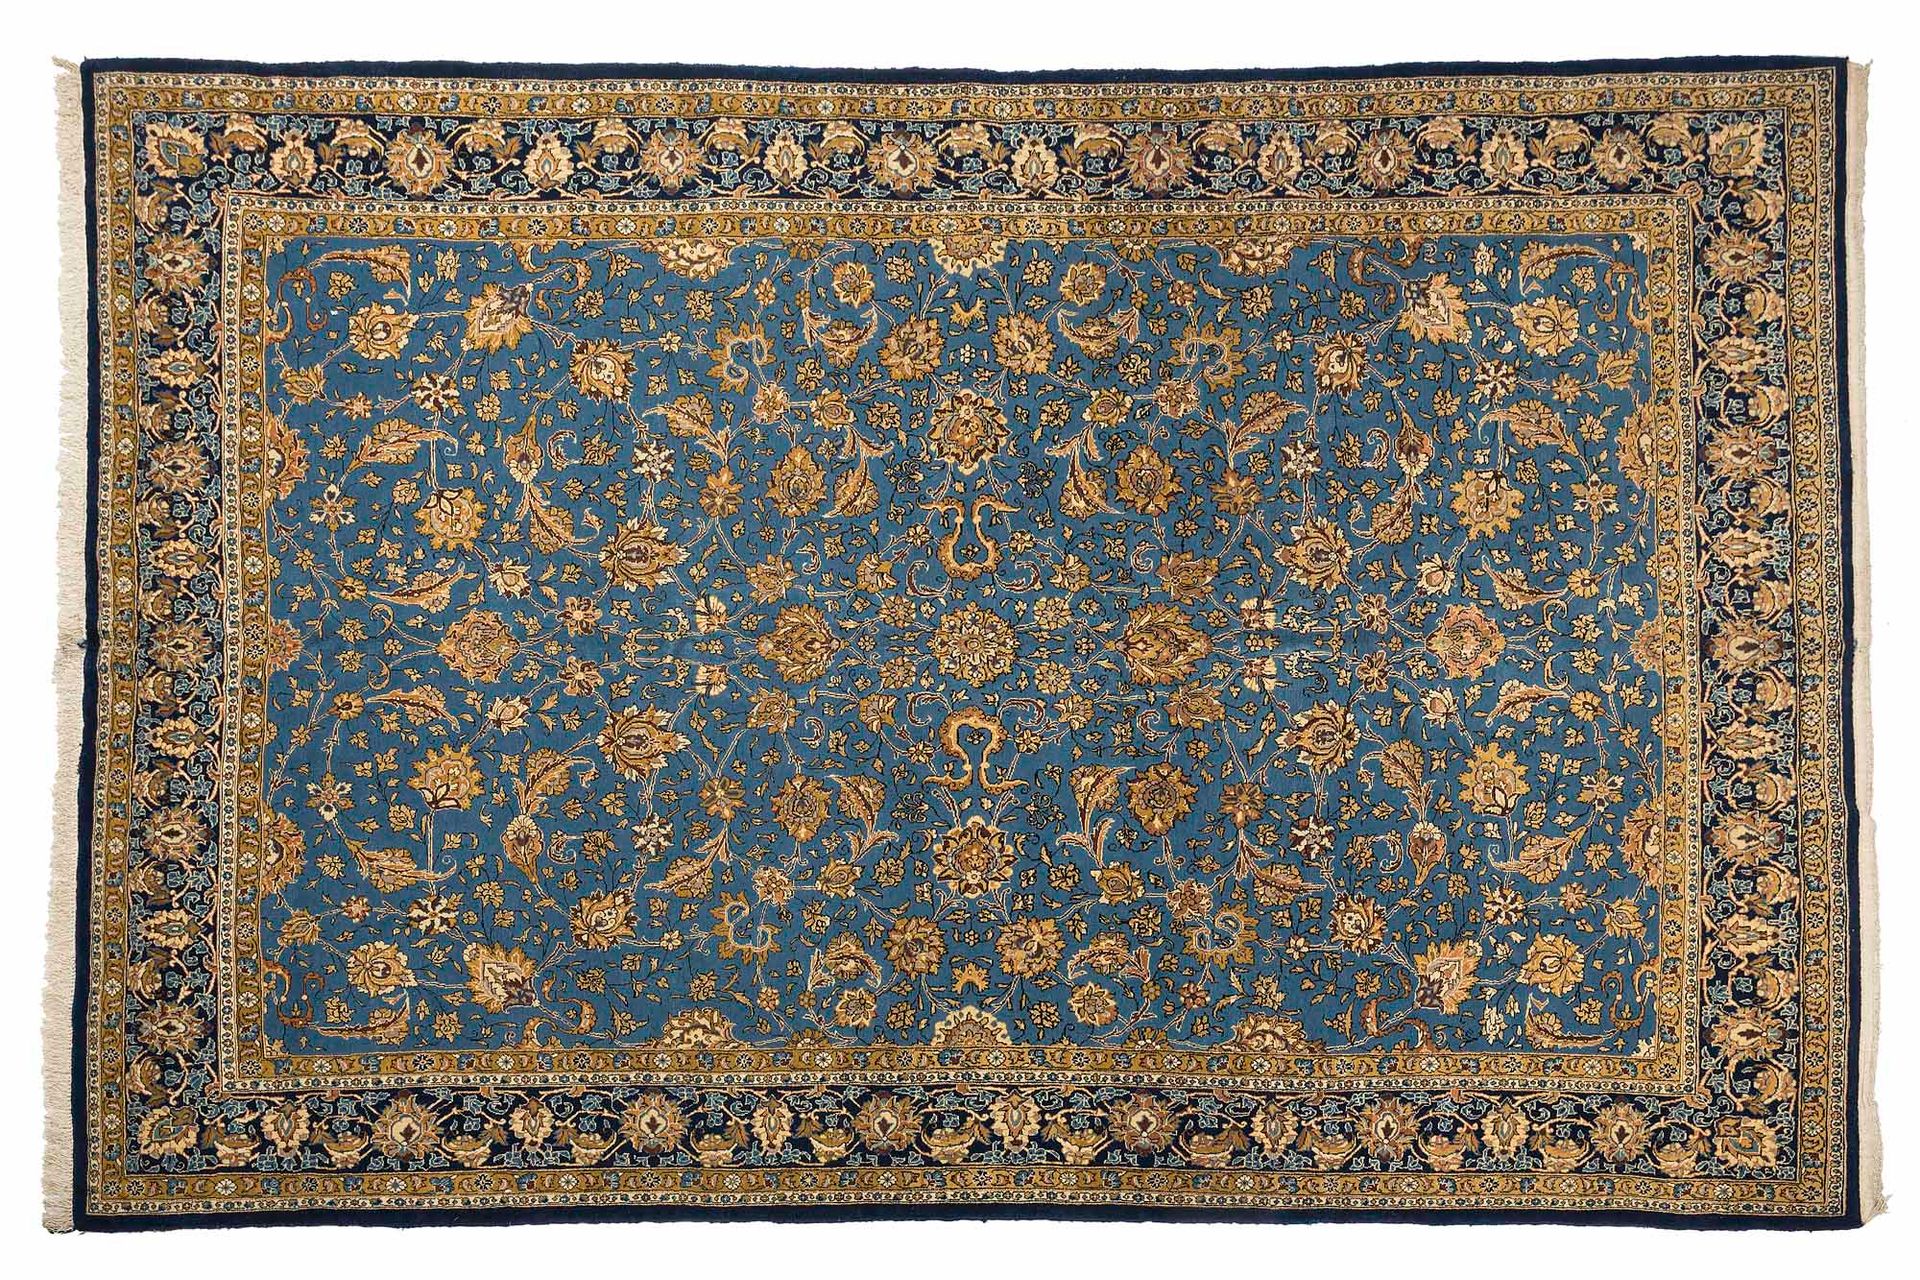 Null Silk inlaid GHOUM carpet (Iran), middle of the 20th century, Shah's time.

&hellip;